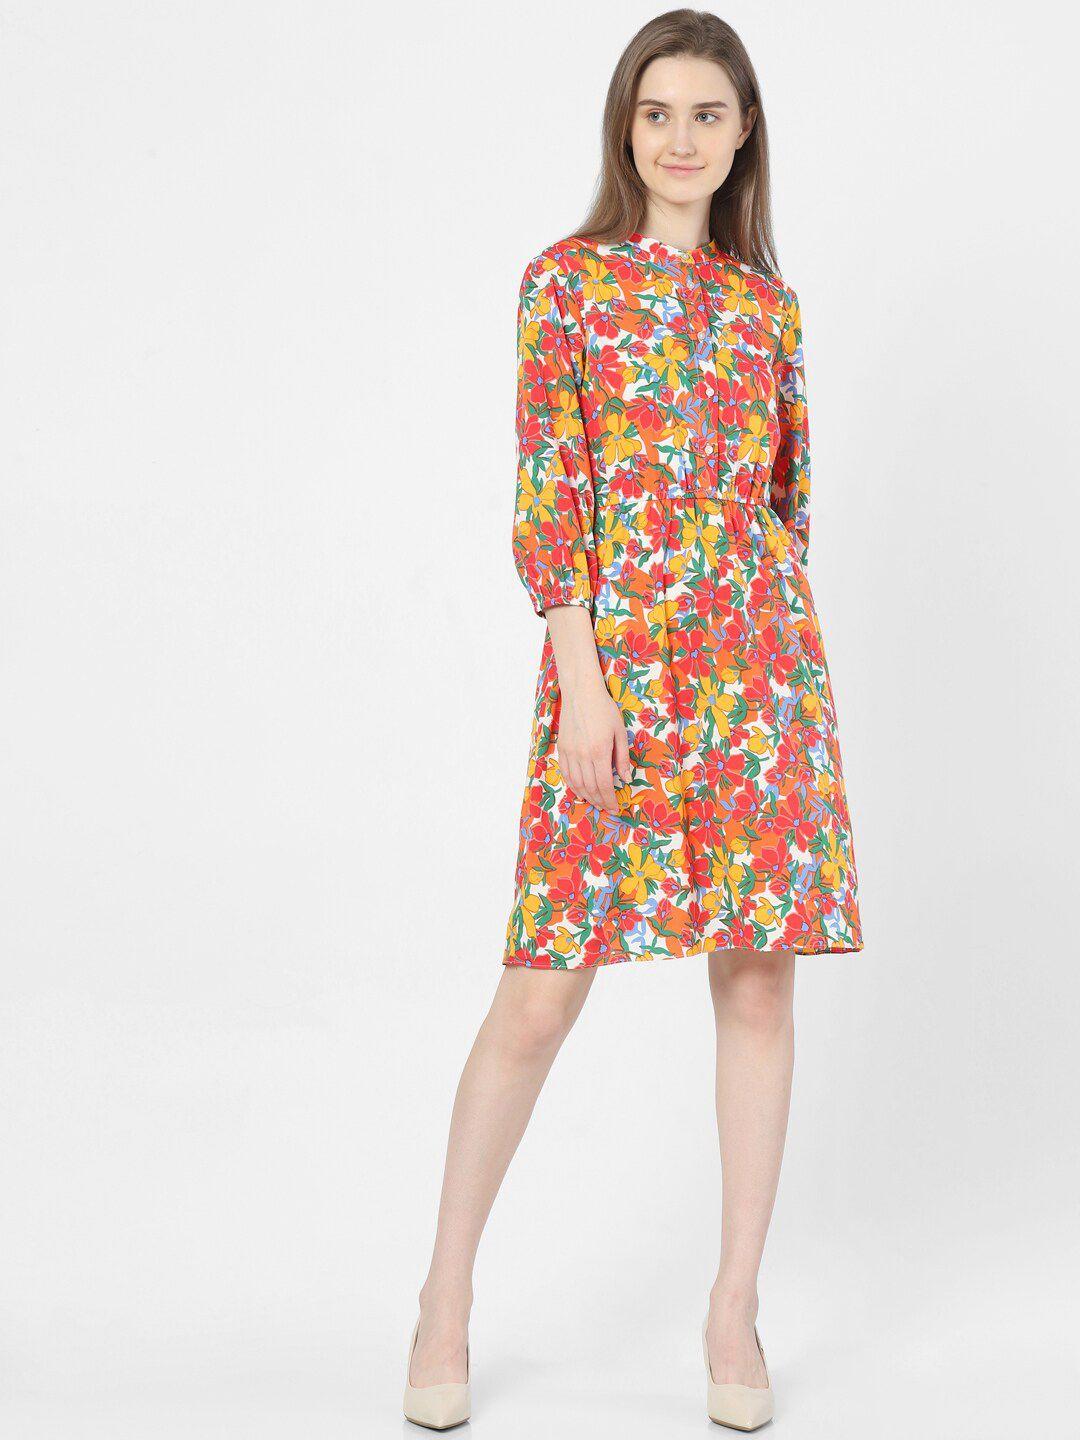 vero moda white & yellow floral  fit and flare  dress